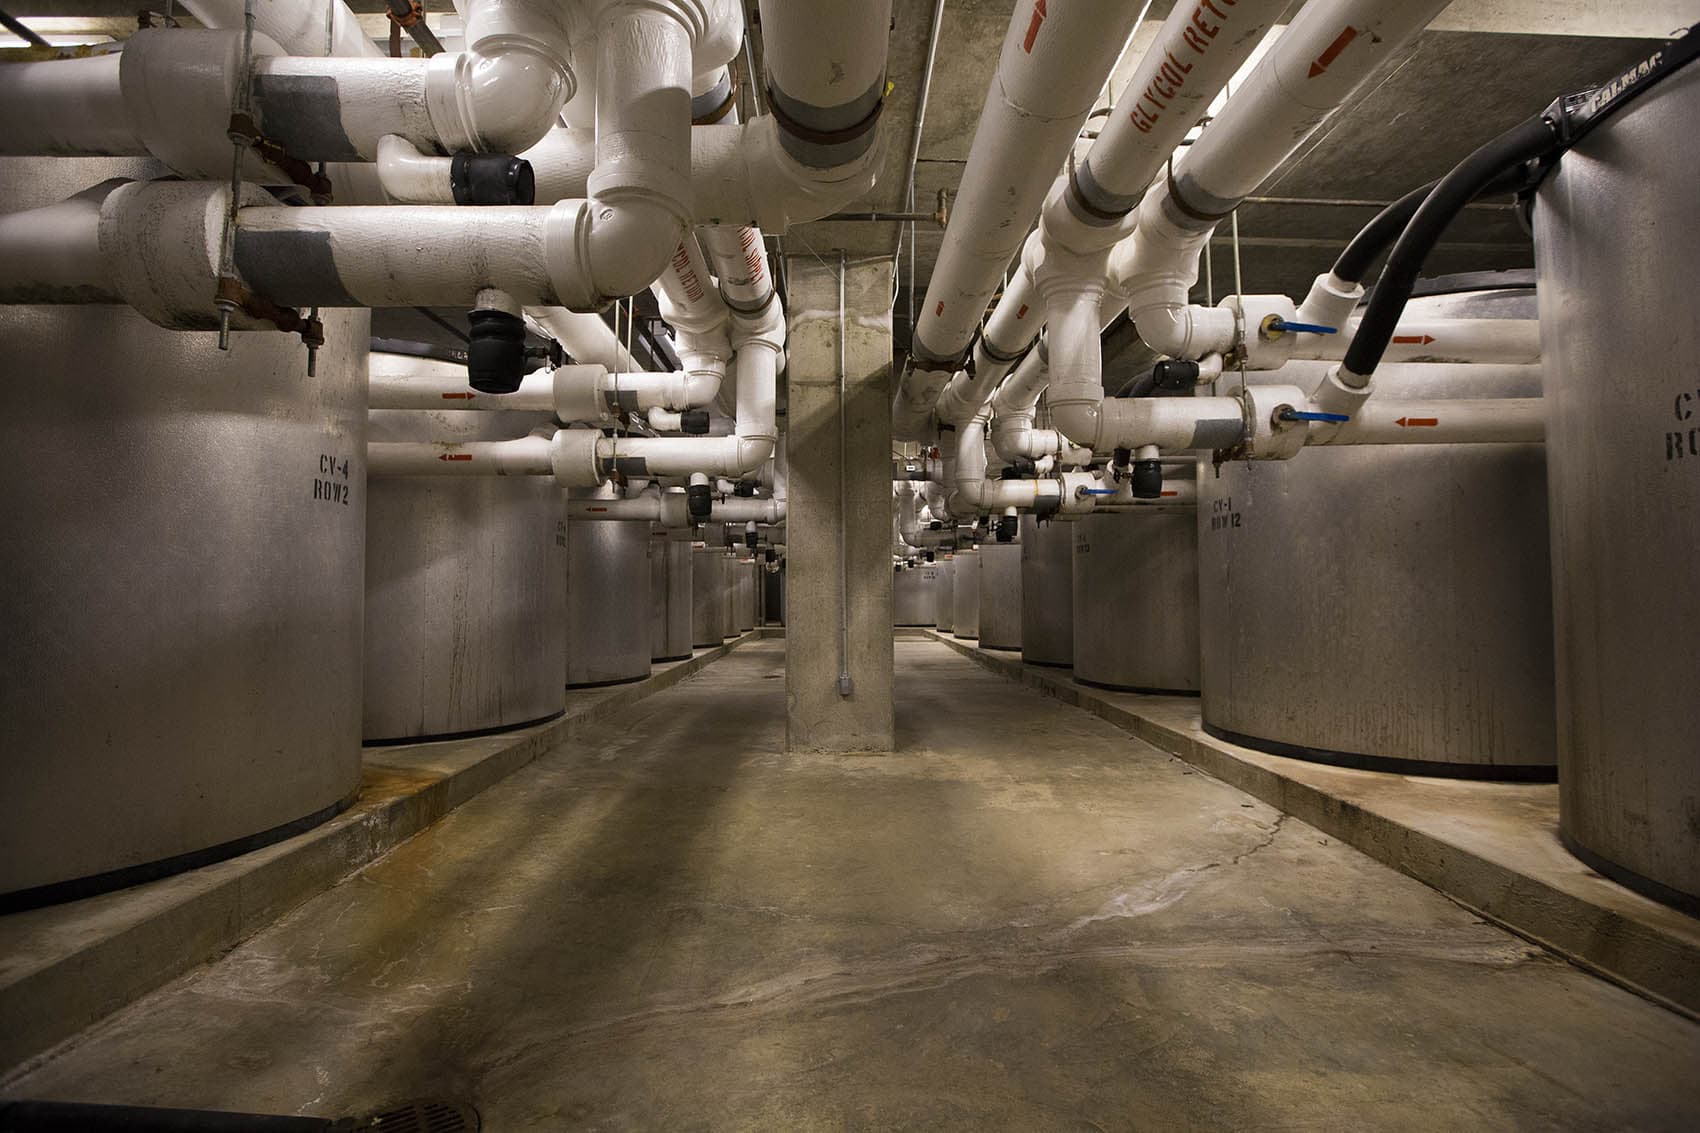 Sixty-five IceBank Energy Storage tanks in the basement of the Moakley Courthouse in Boston. (Jesse Costa/WBUR)